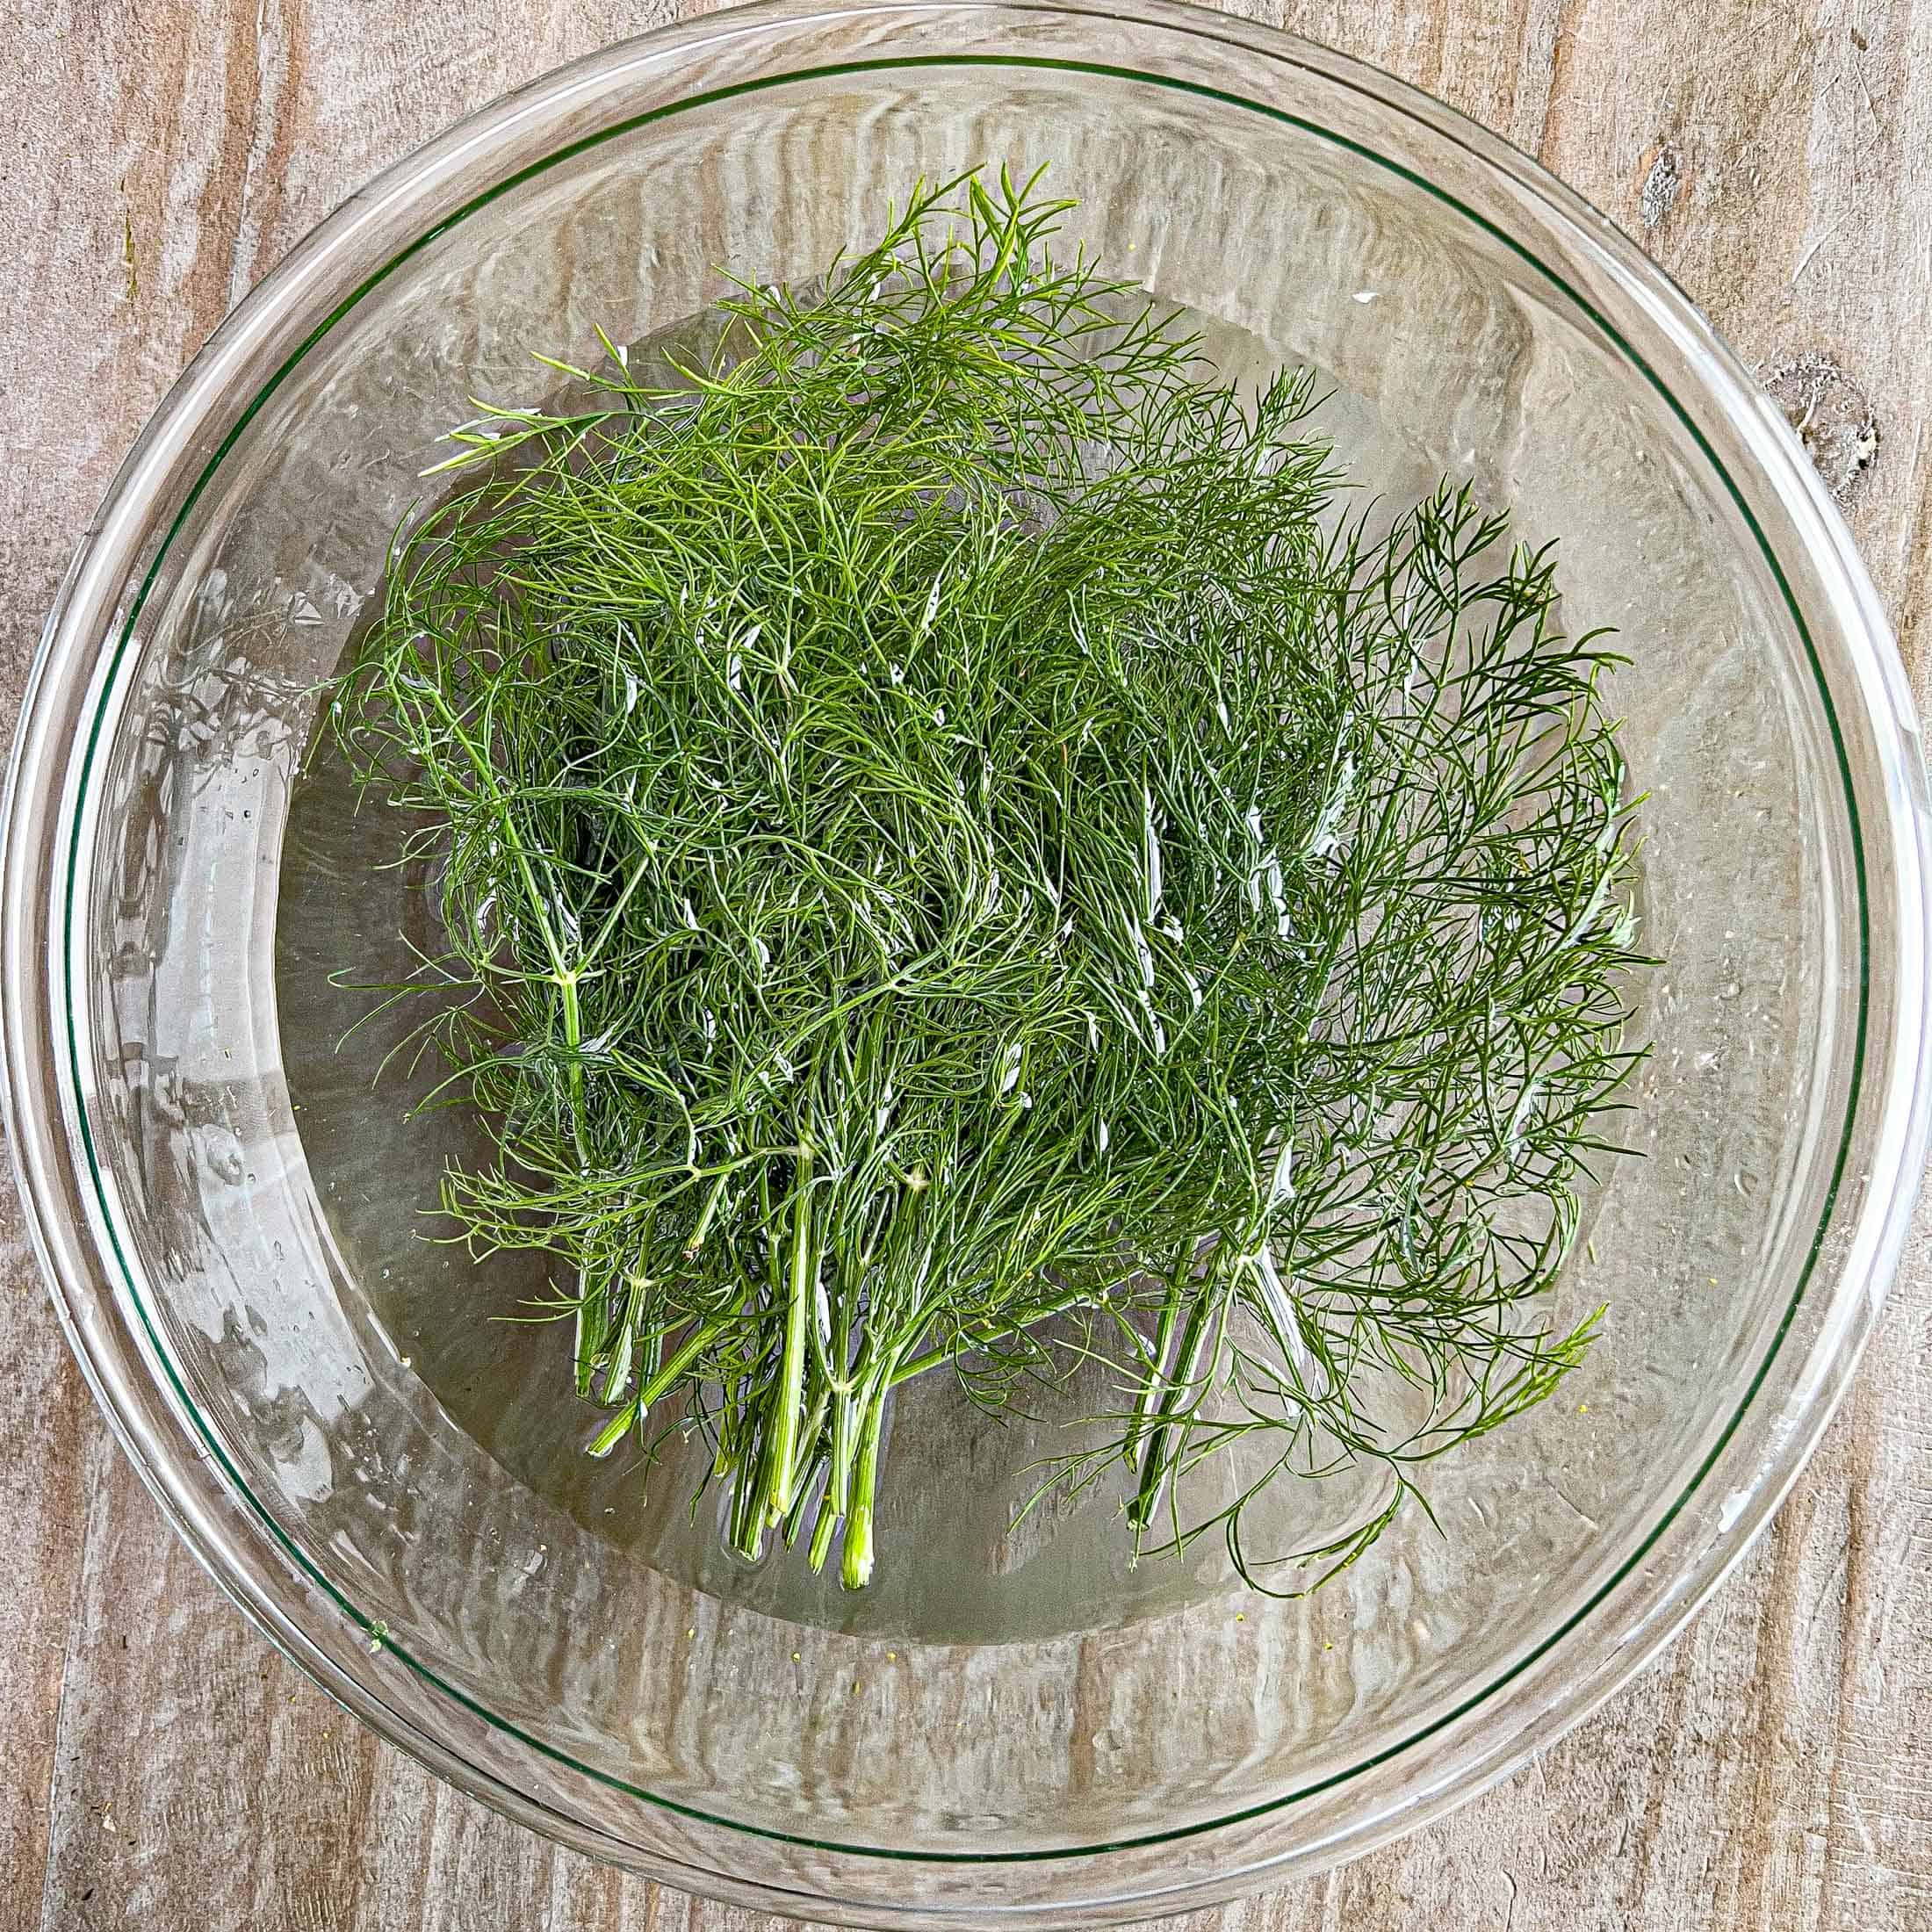 Dill being washed in cold water in a glass bowl.